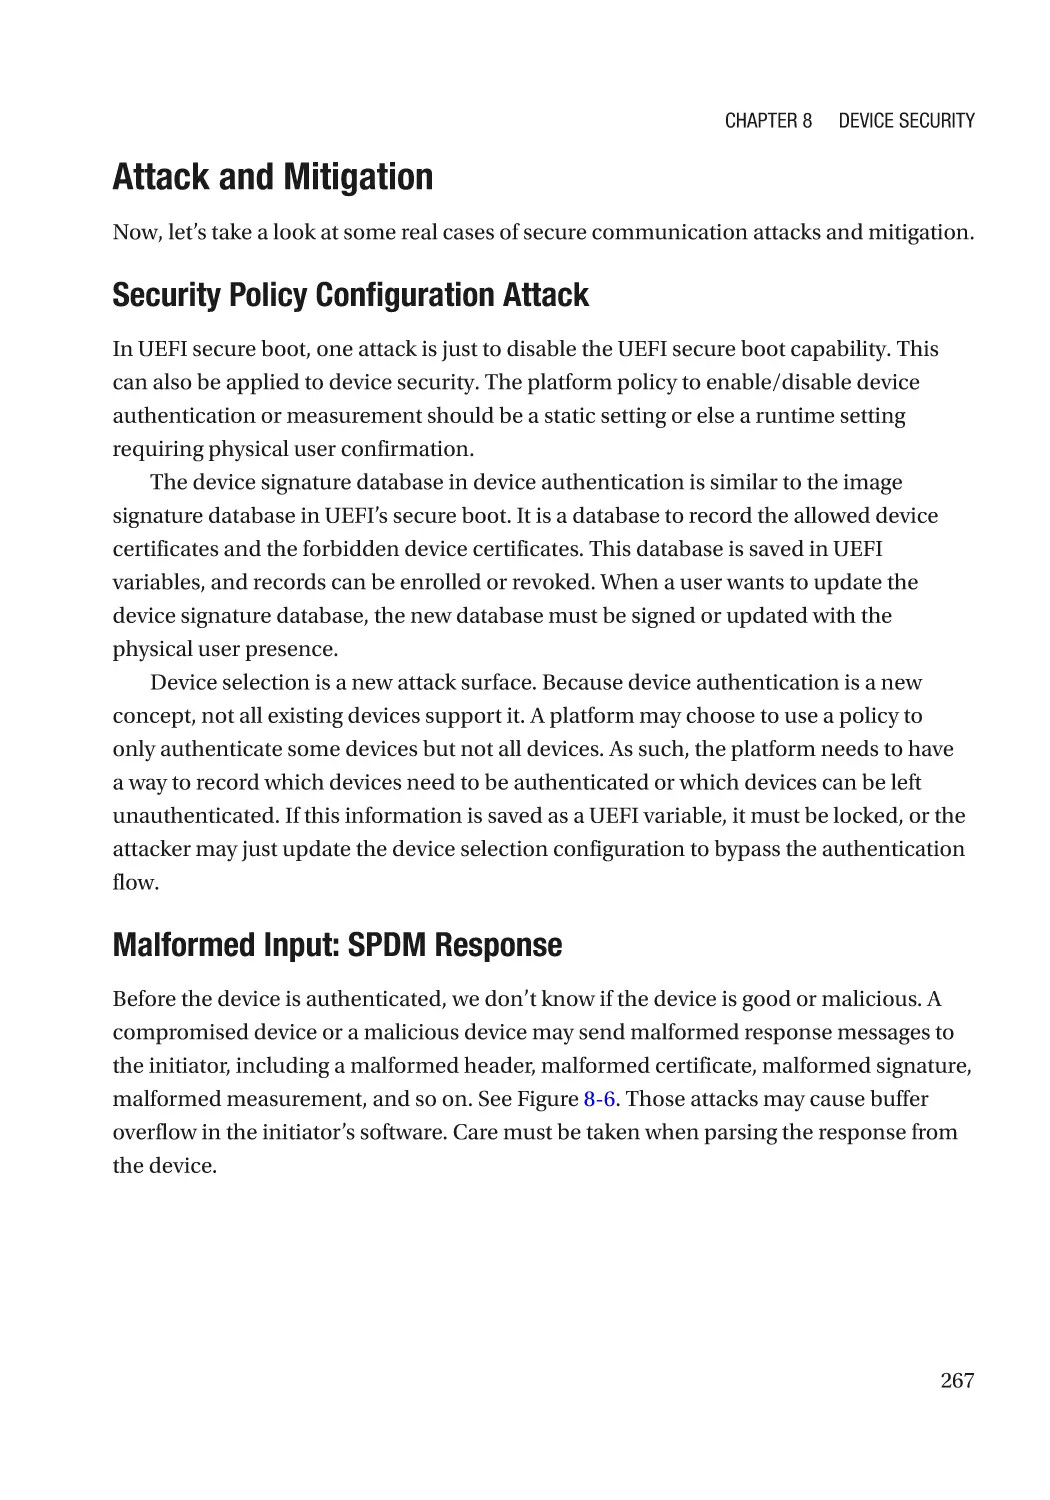 Attack and Mitigation
Security Policy Configuration Attack
Malformed Input